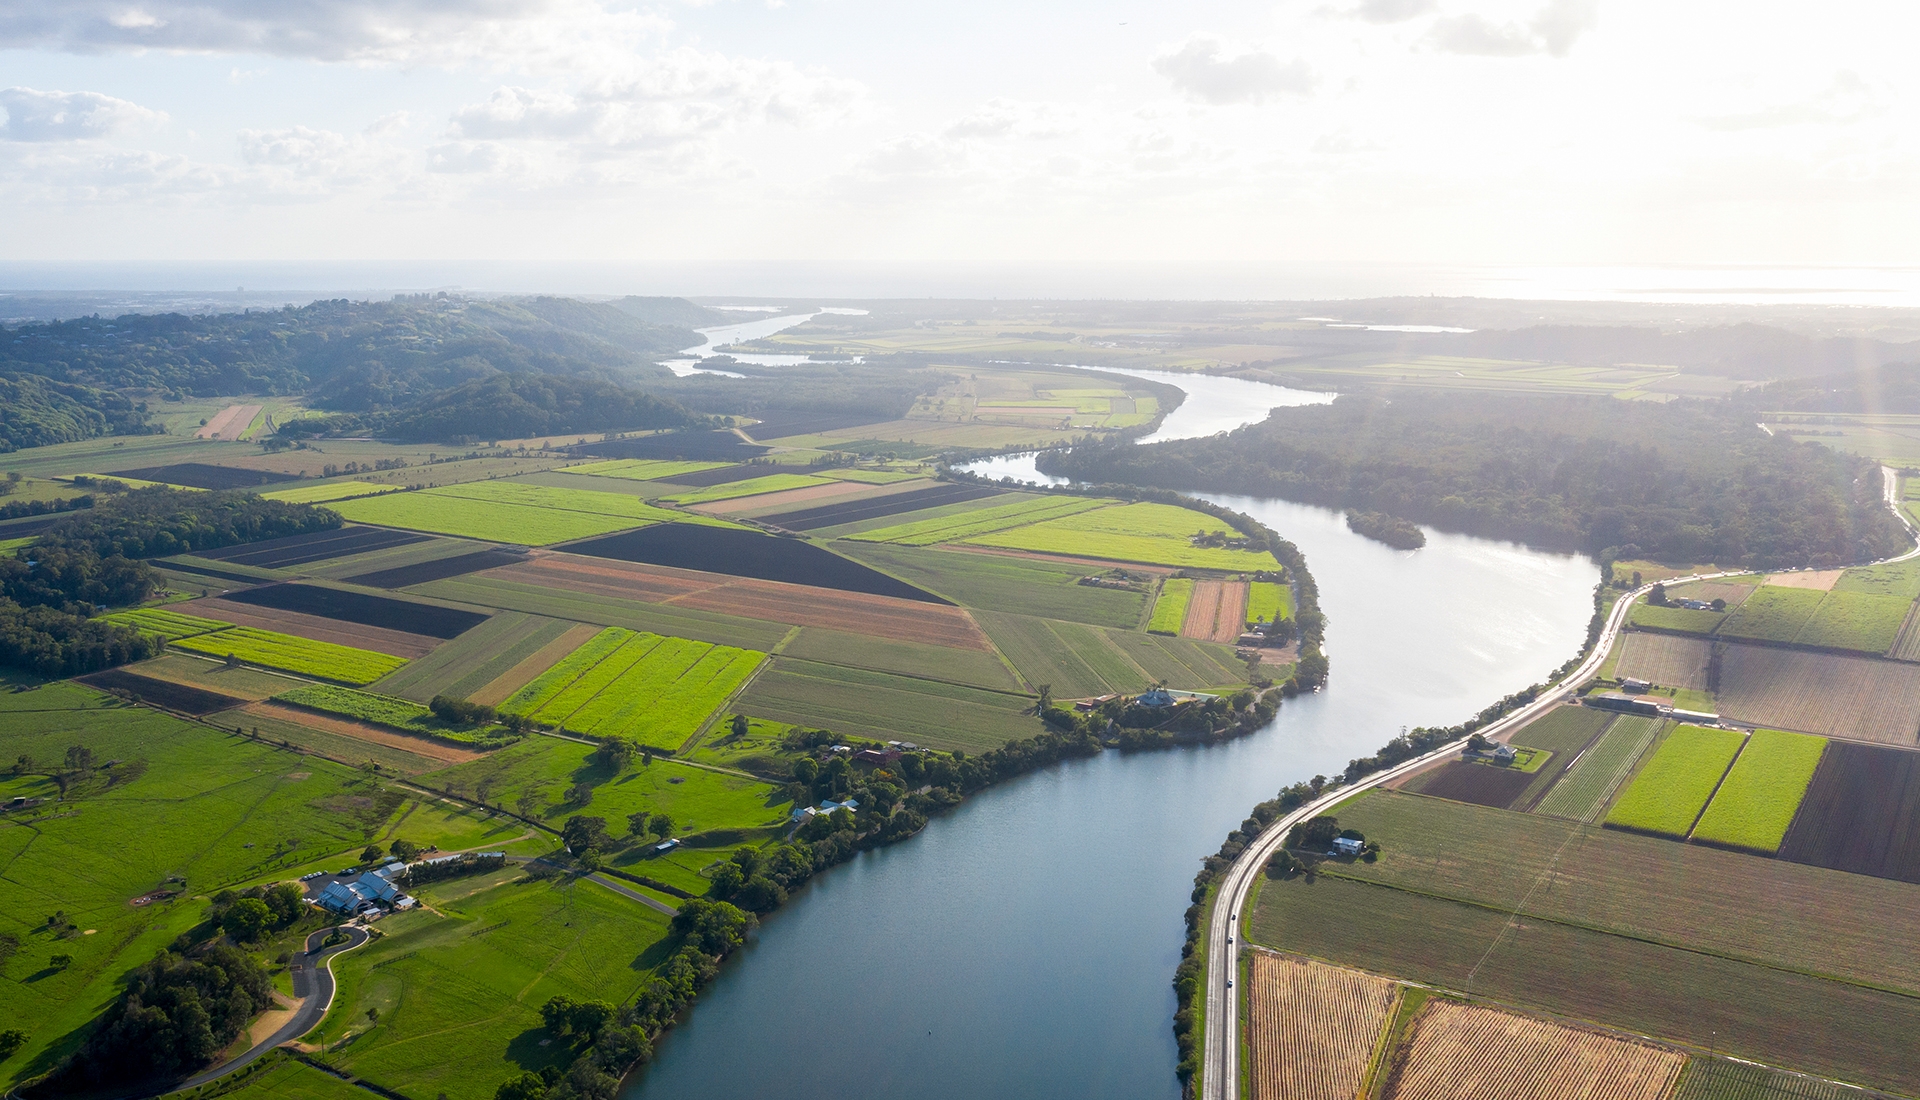 Scenic view of the Tweed River meandering through a beautiful landscape- Tweed River